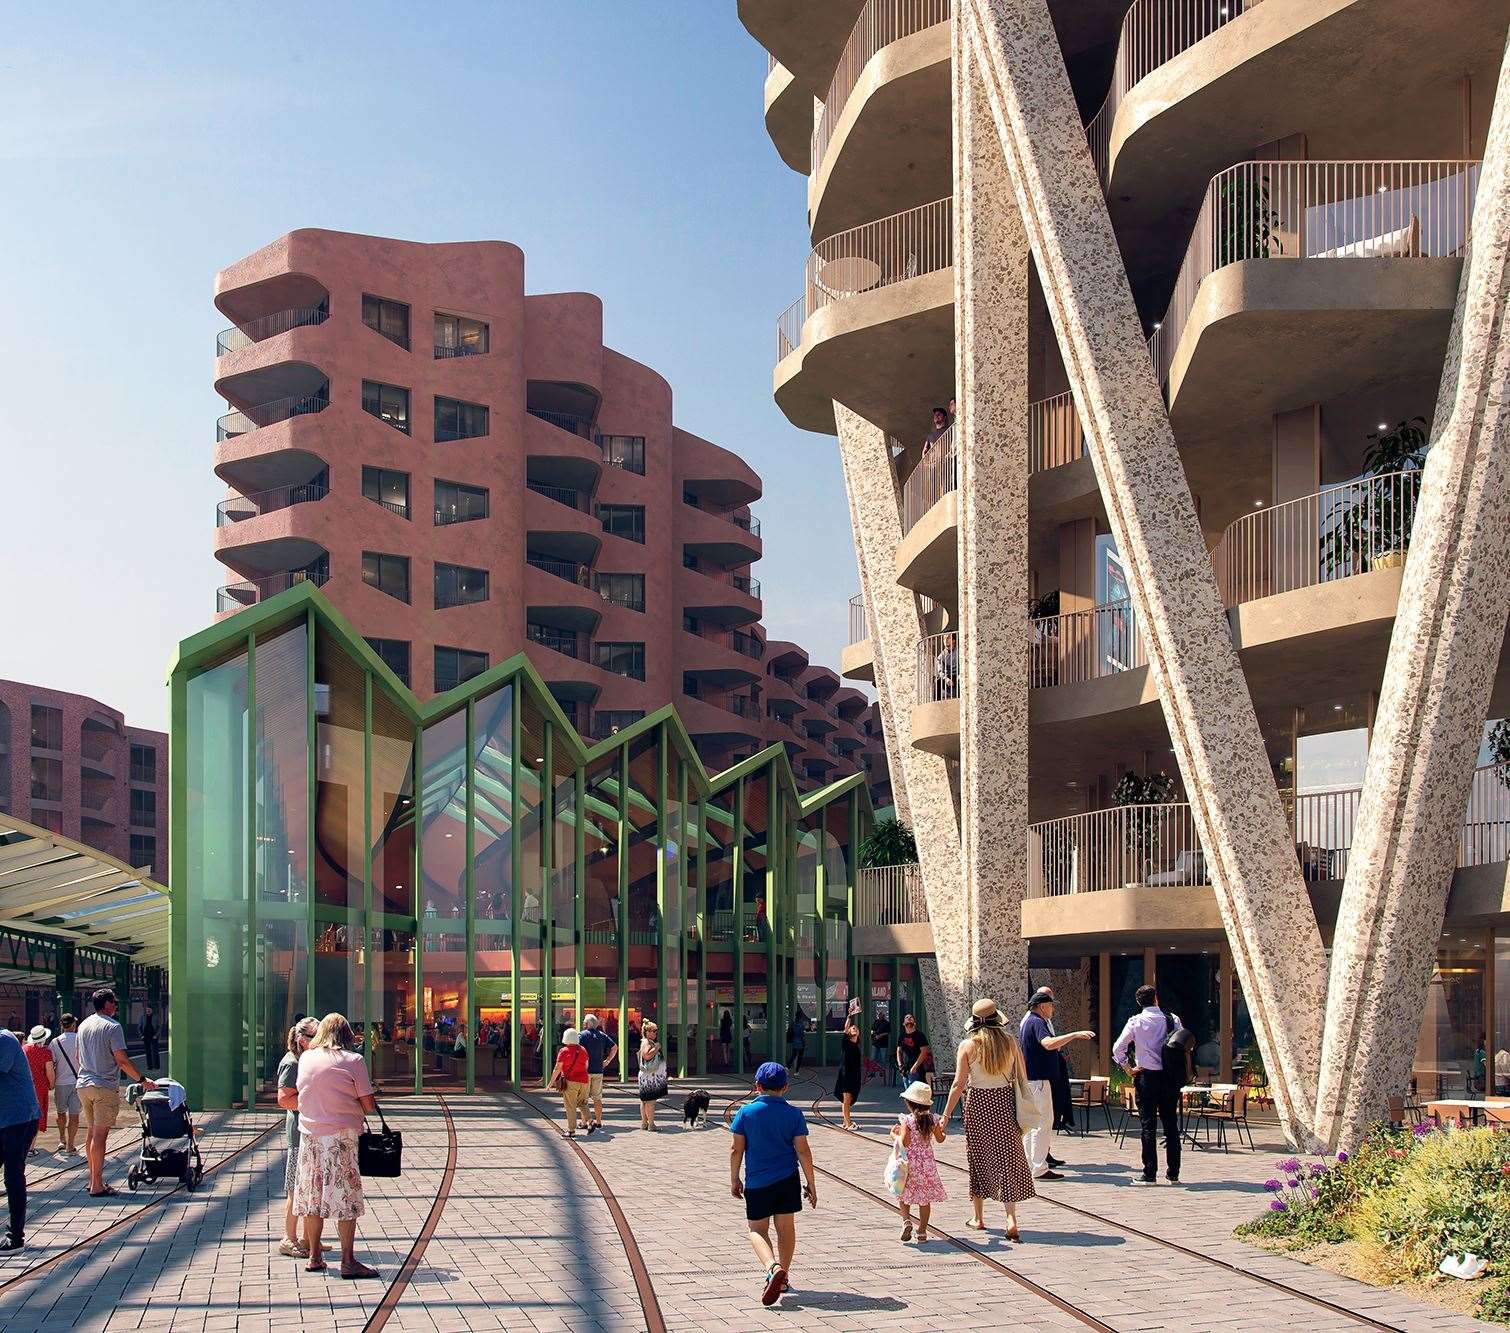 Residents and readers have hit out at the scale and design of the development